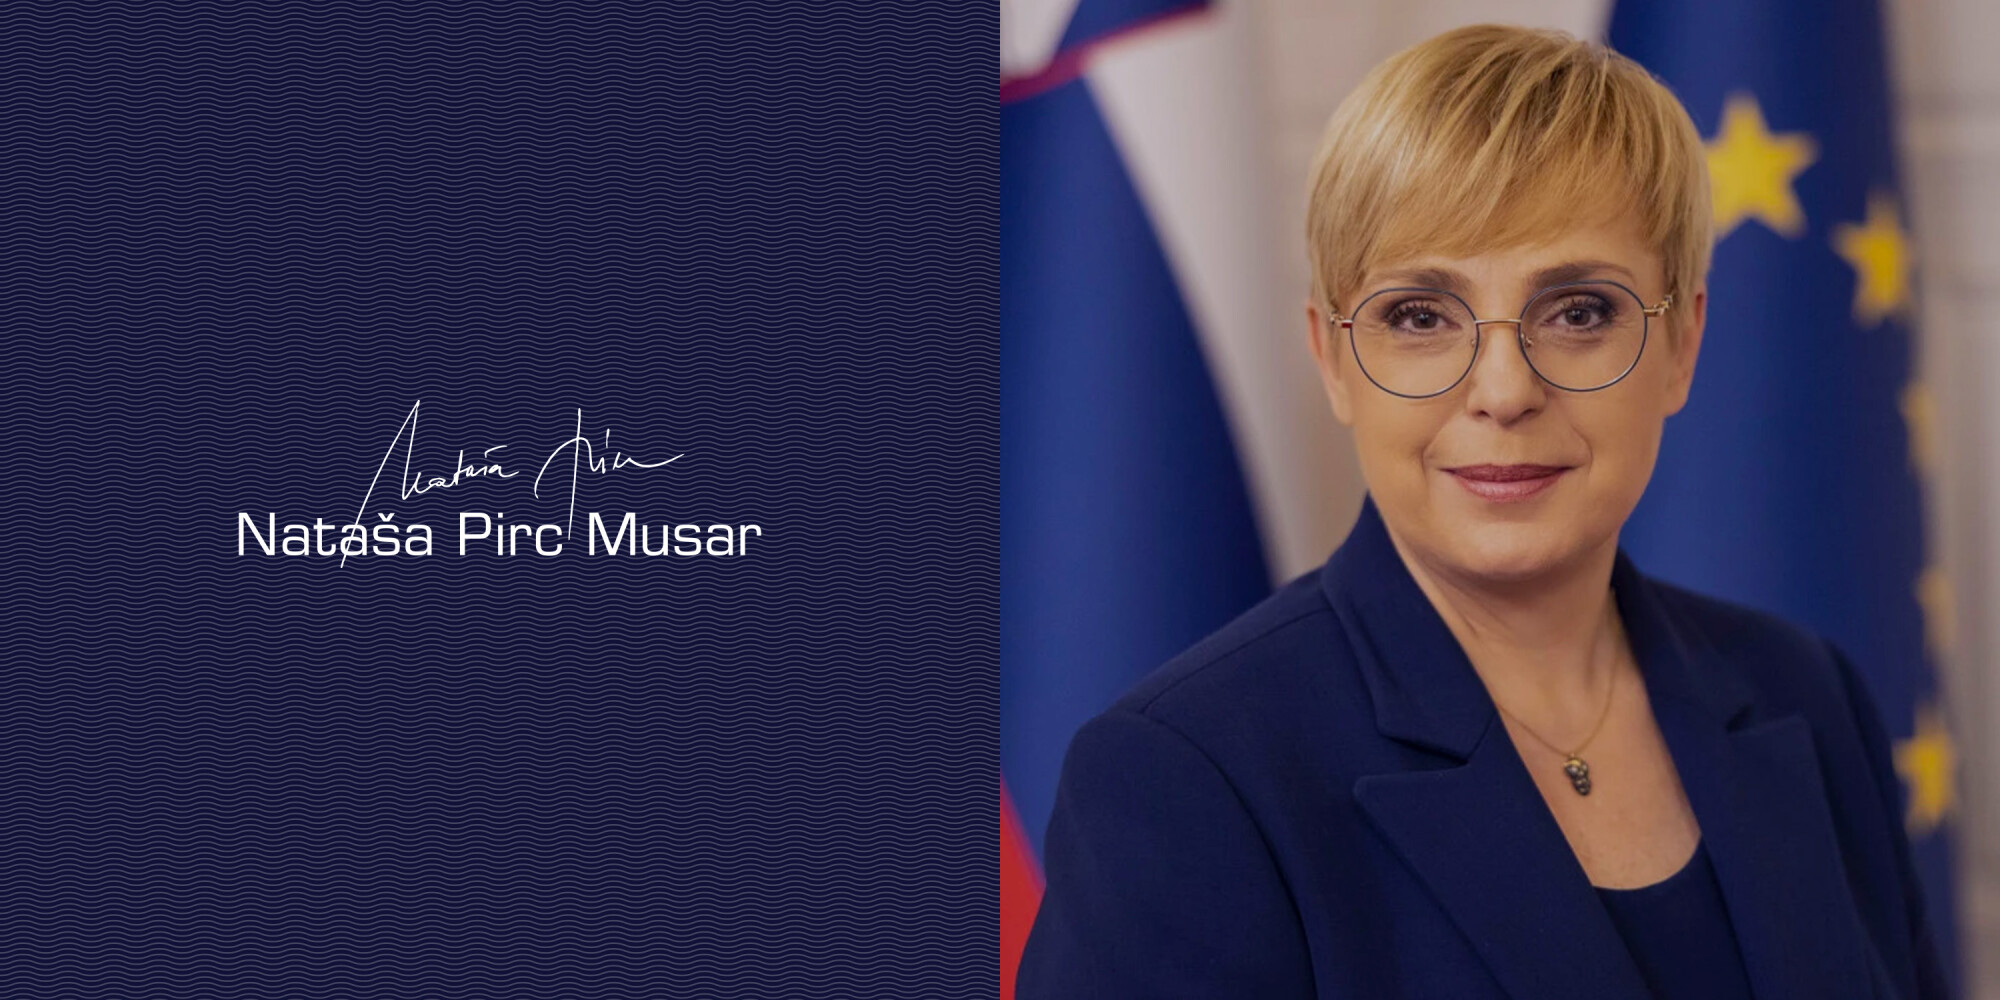 About the president  President of the Republic of Slovenia